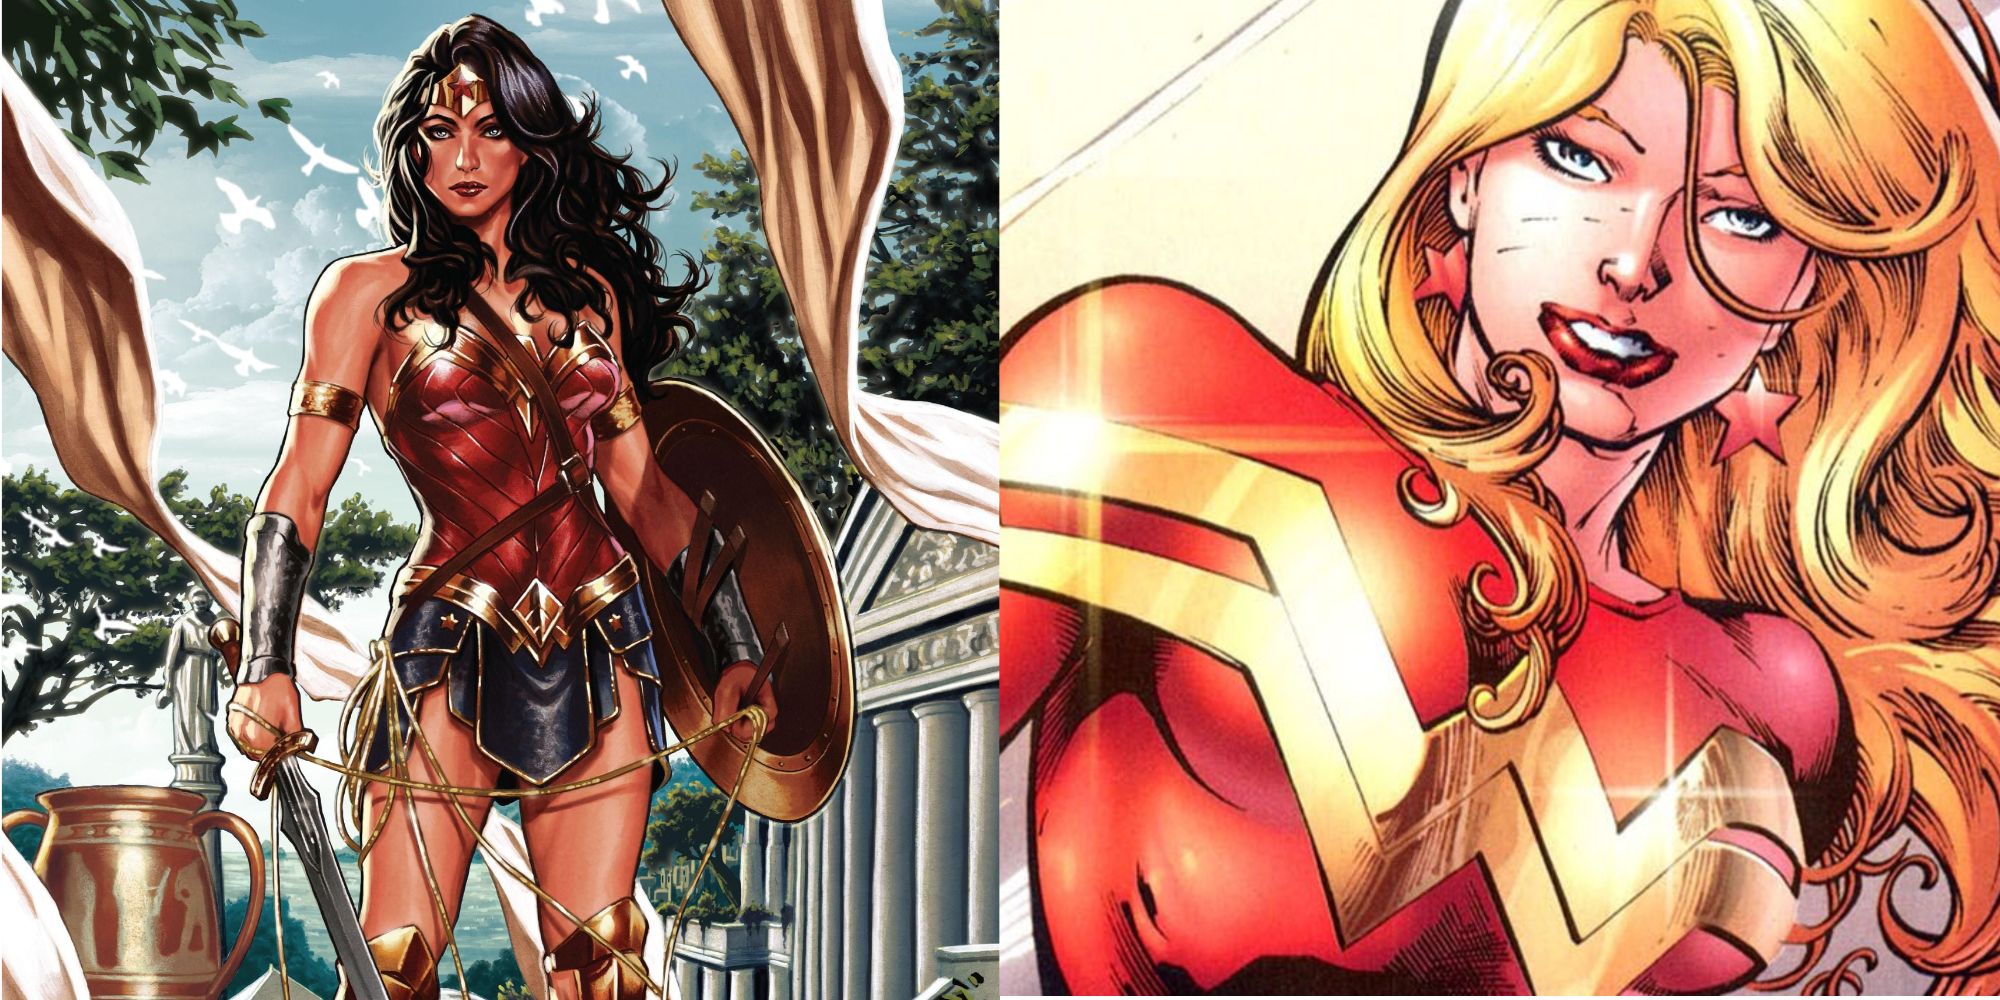 A split image of DC Comics' Wonder Woman posing with her sword and Cassie Sandsmark.